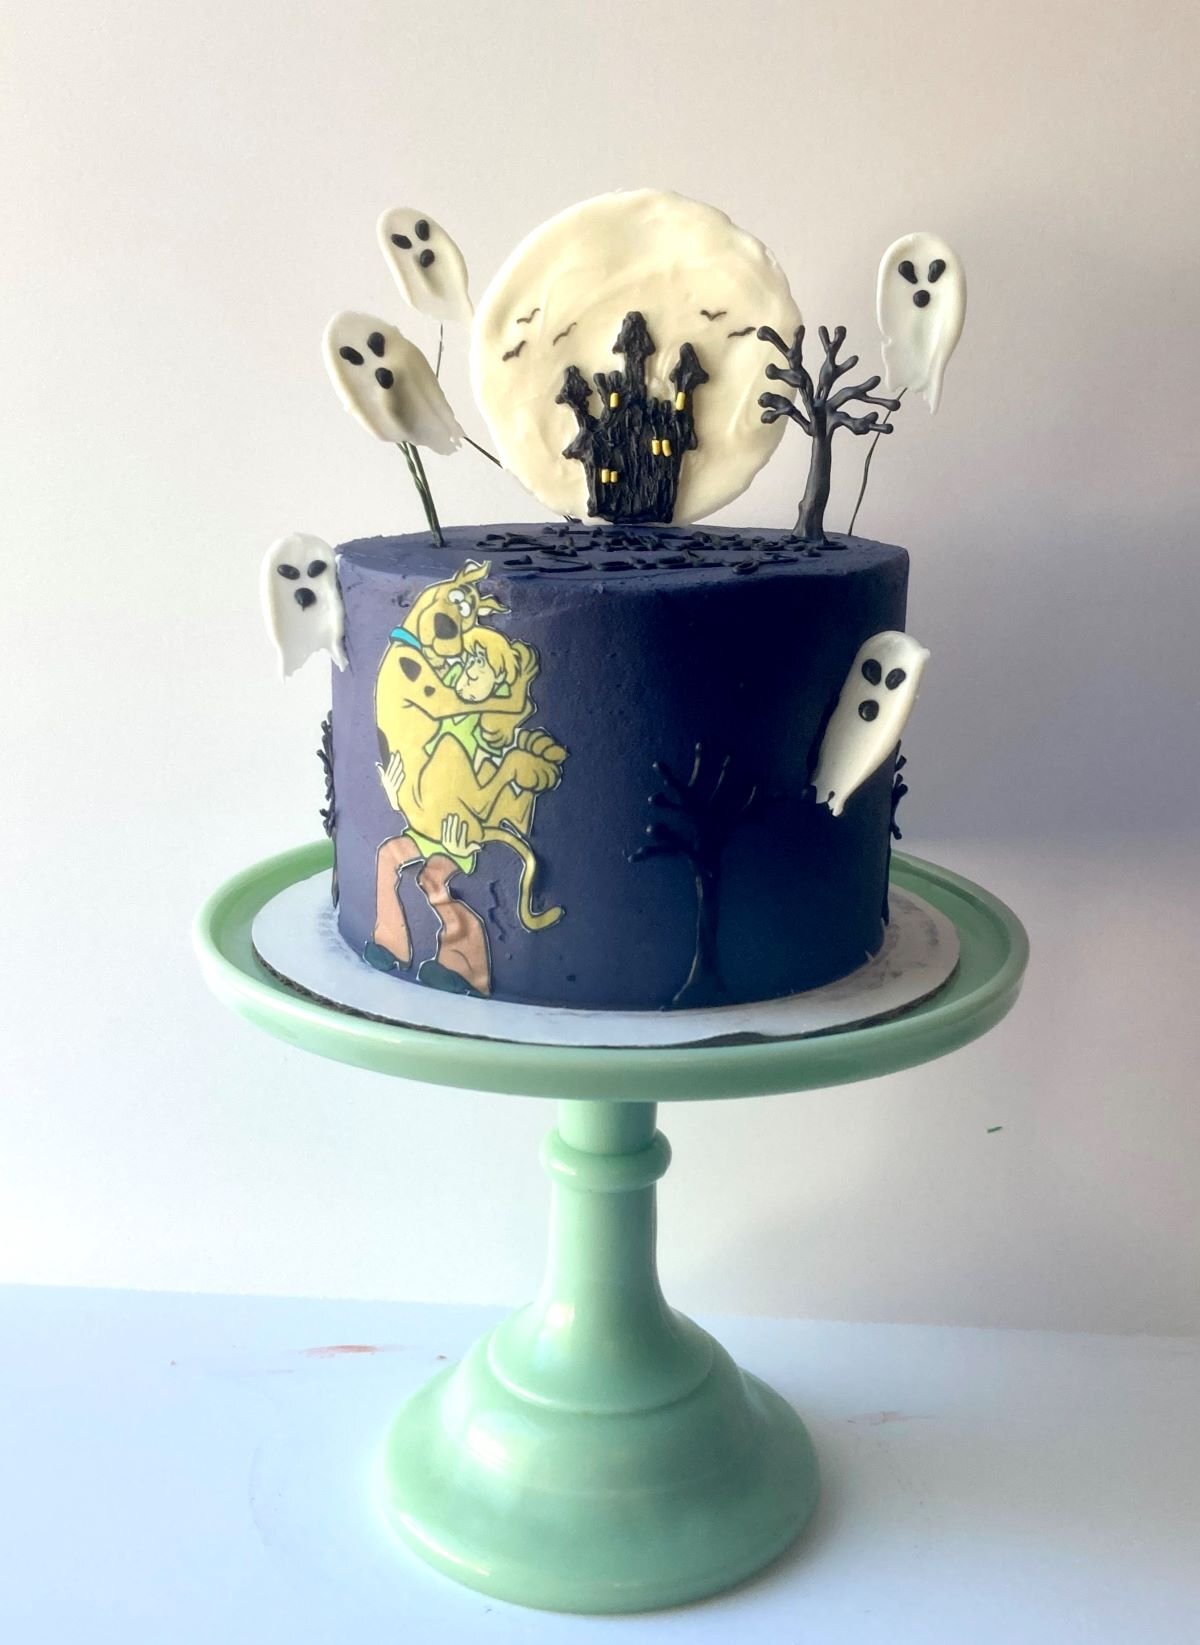 Cake with chocolate ghosts, trees, and moon with castle and edible image of Scooby Doo and Shaggy